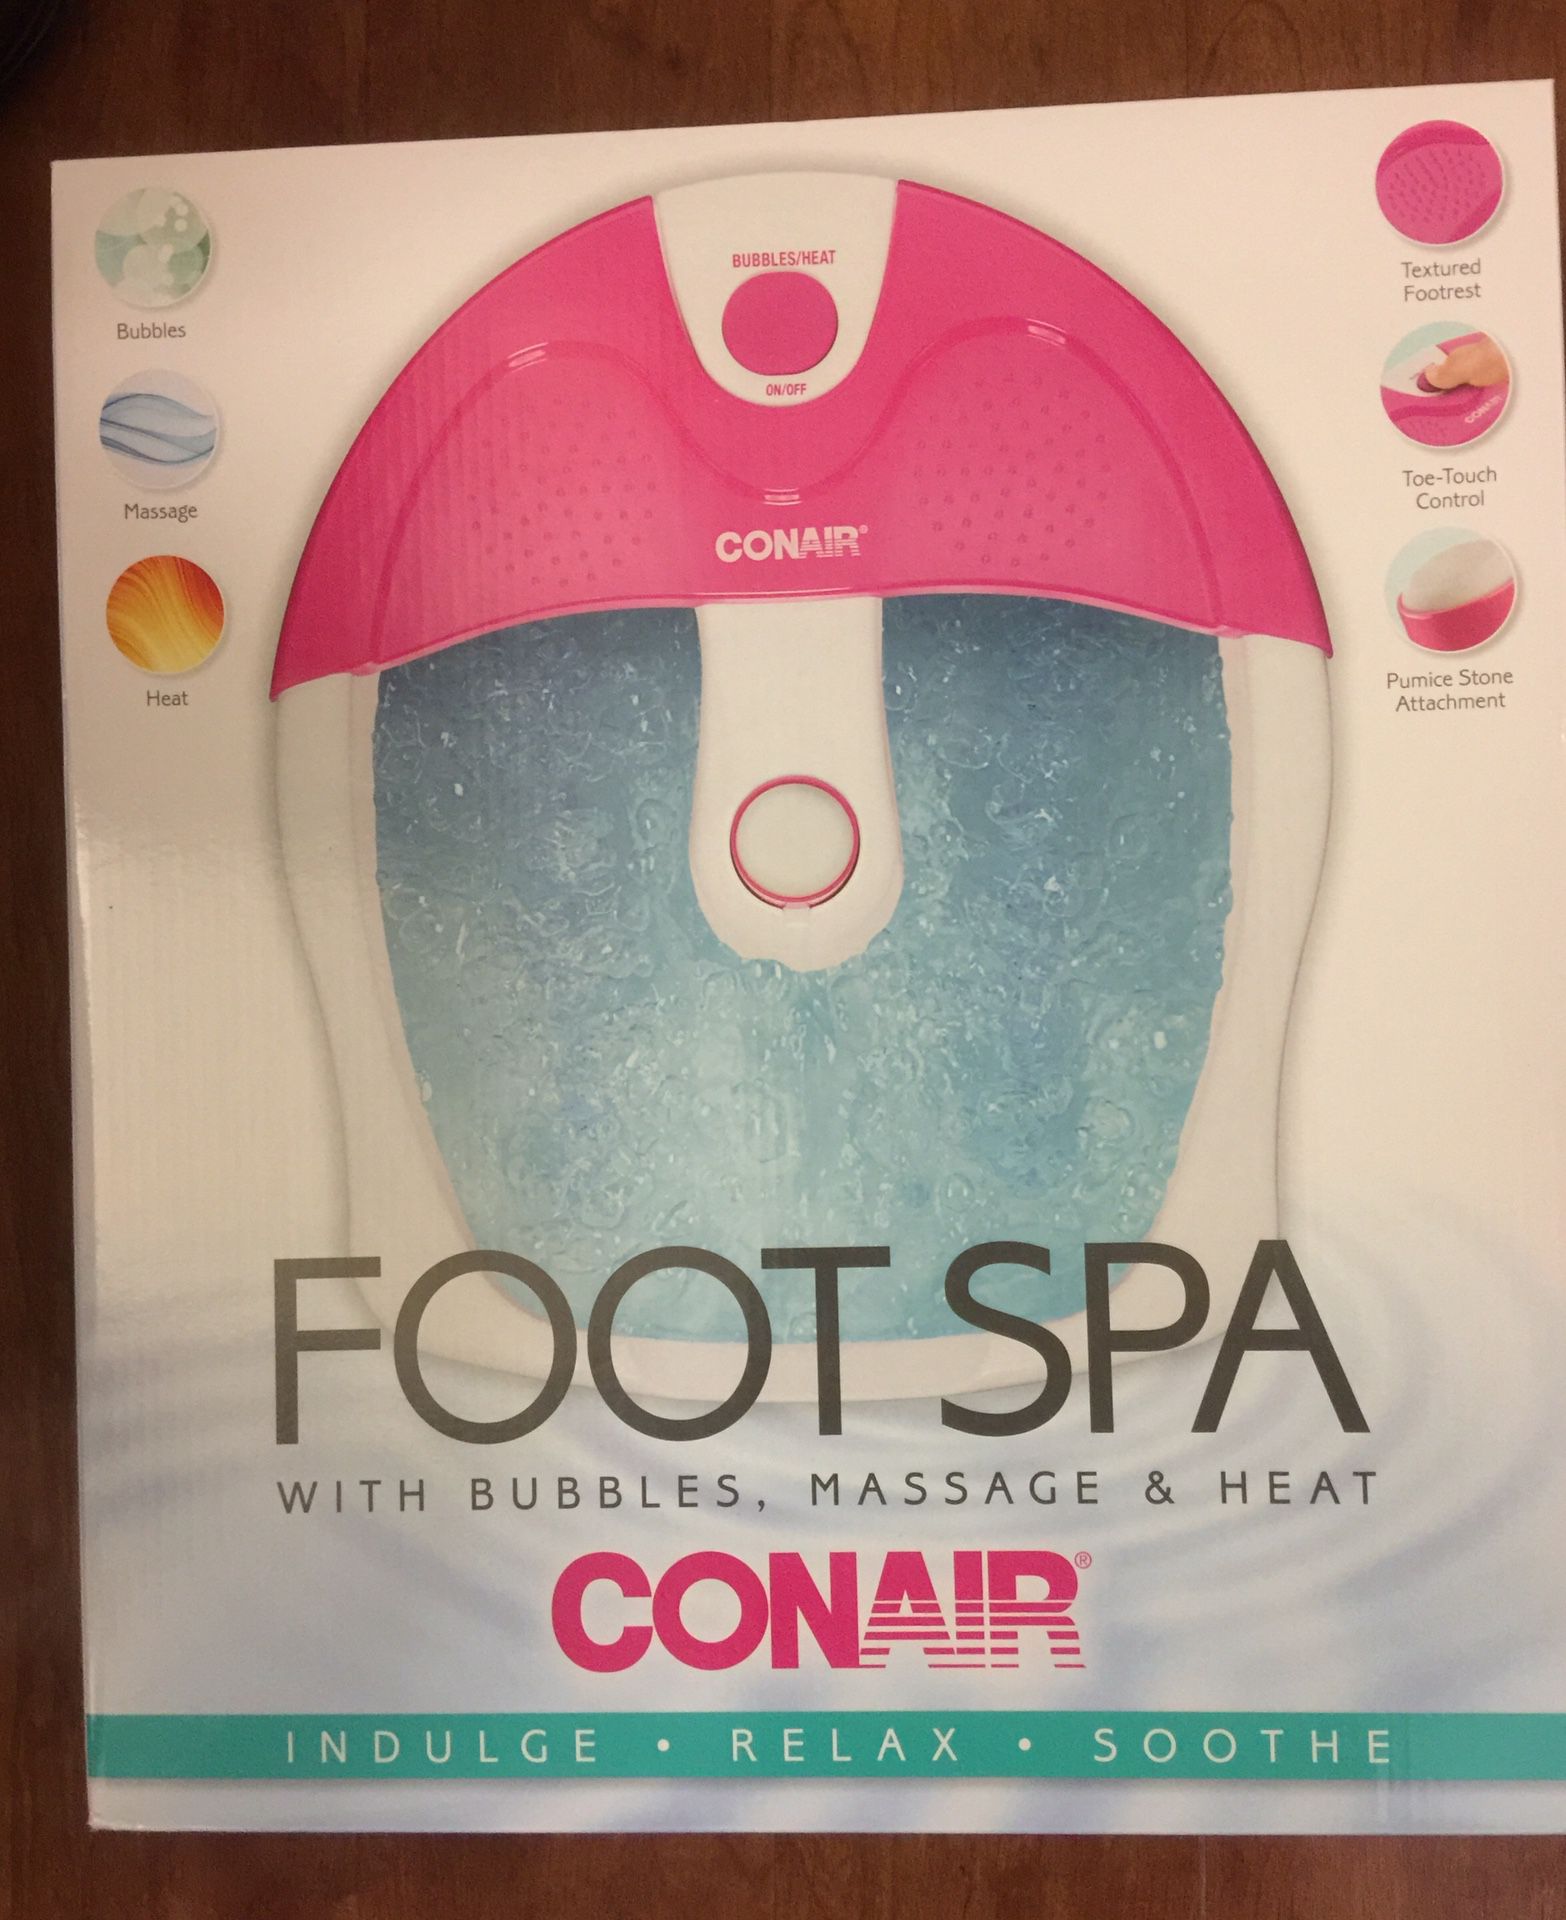 Brand new Conair foot spa with bubbles. massage & heat (pick up only)